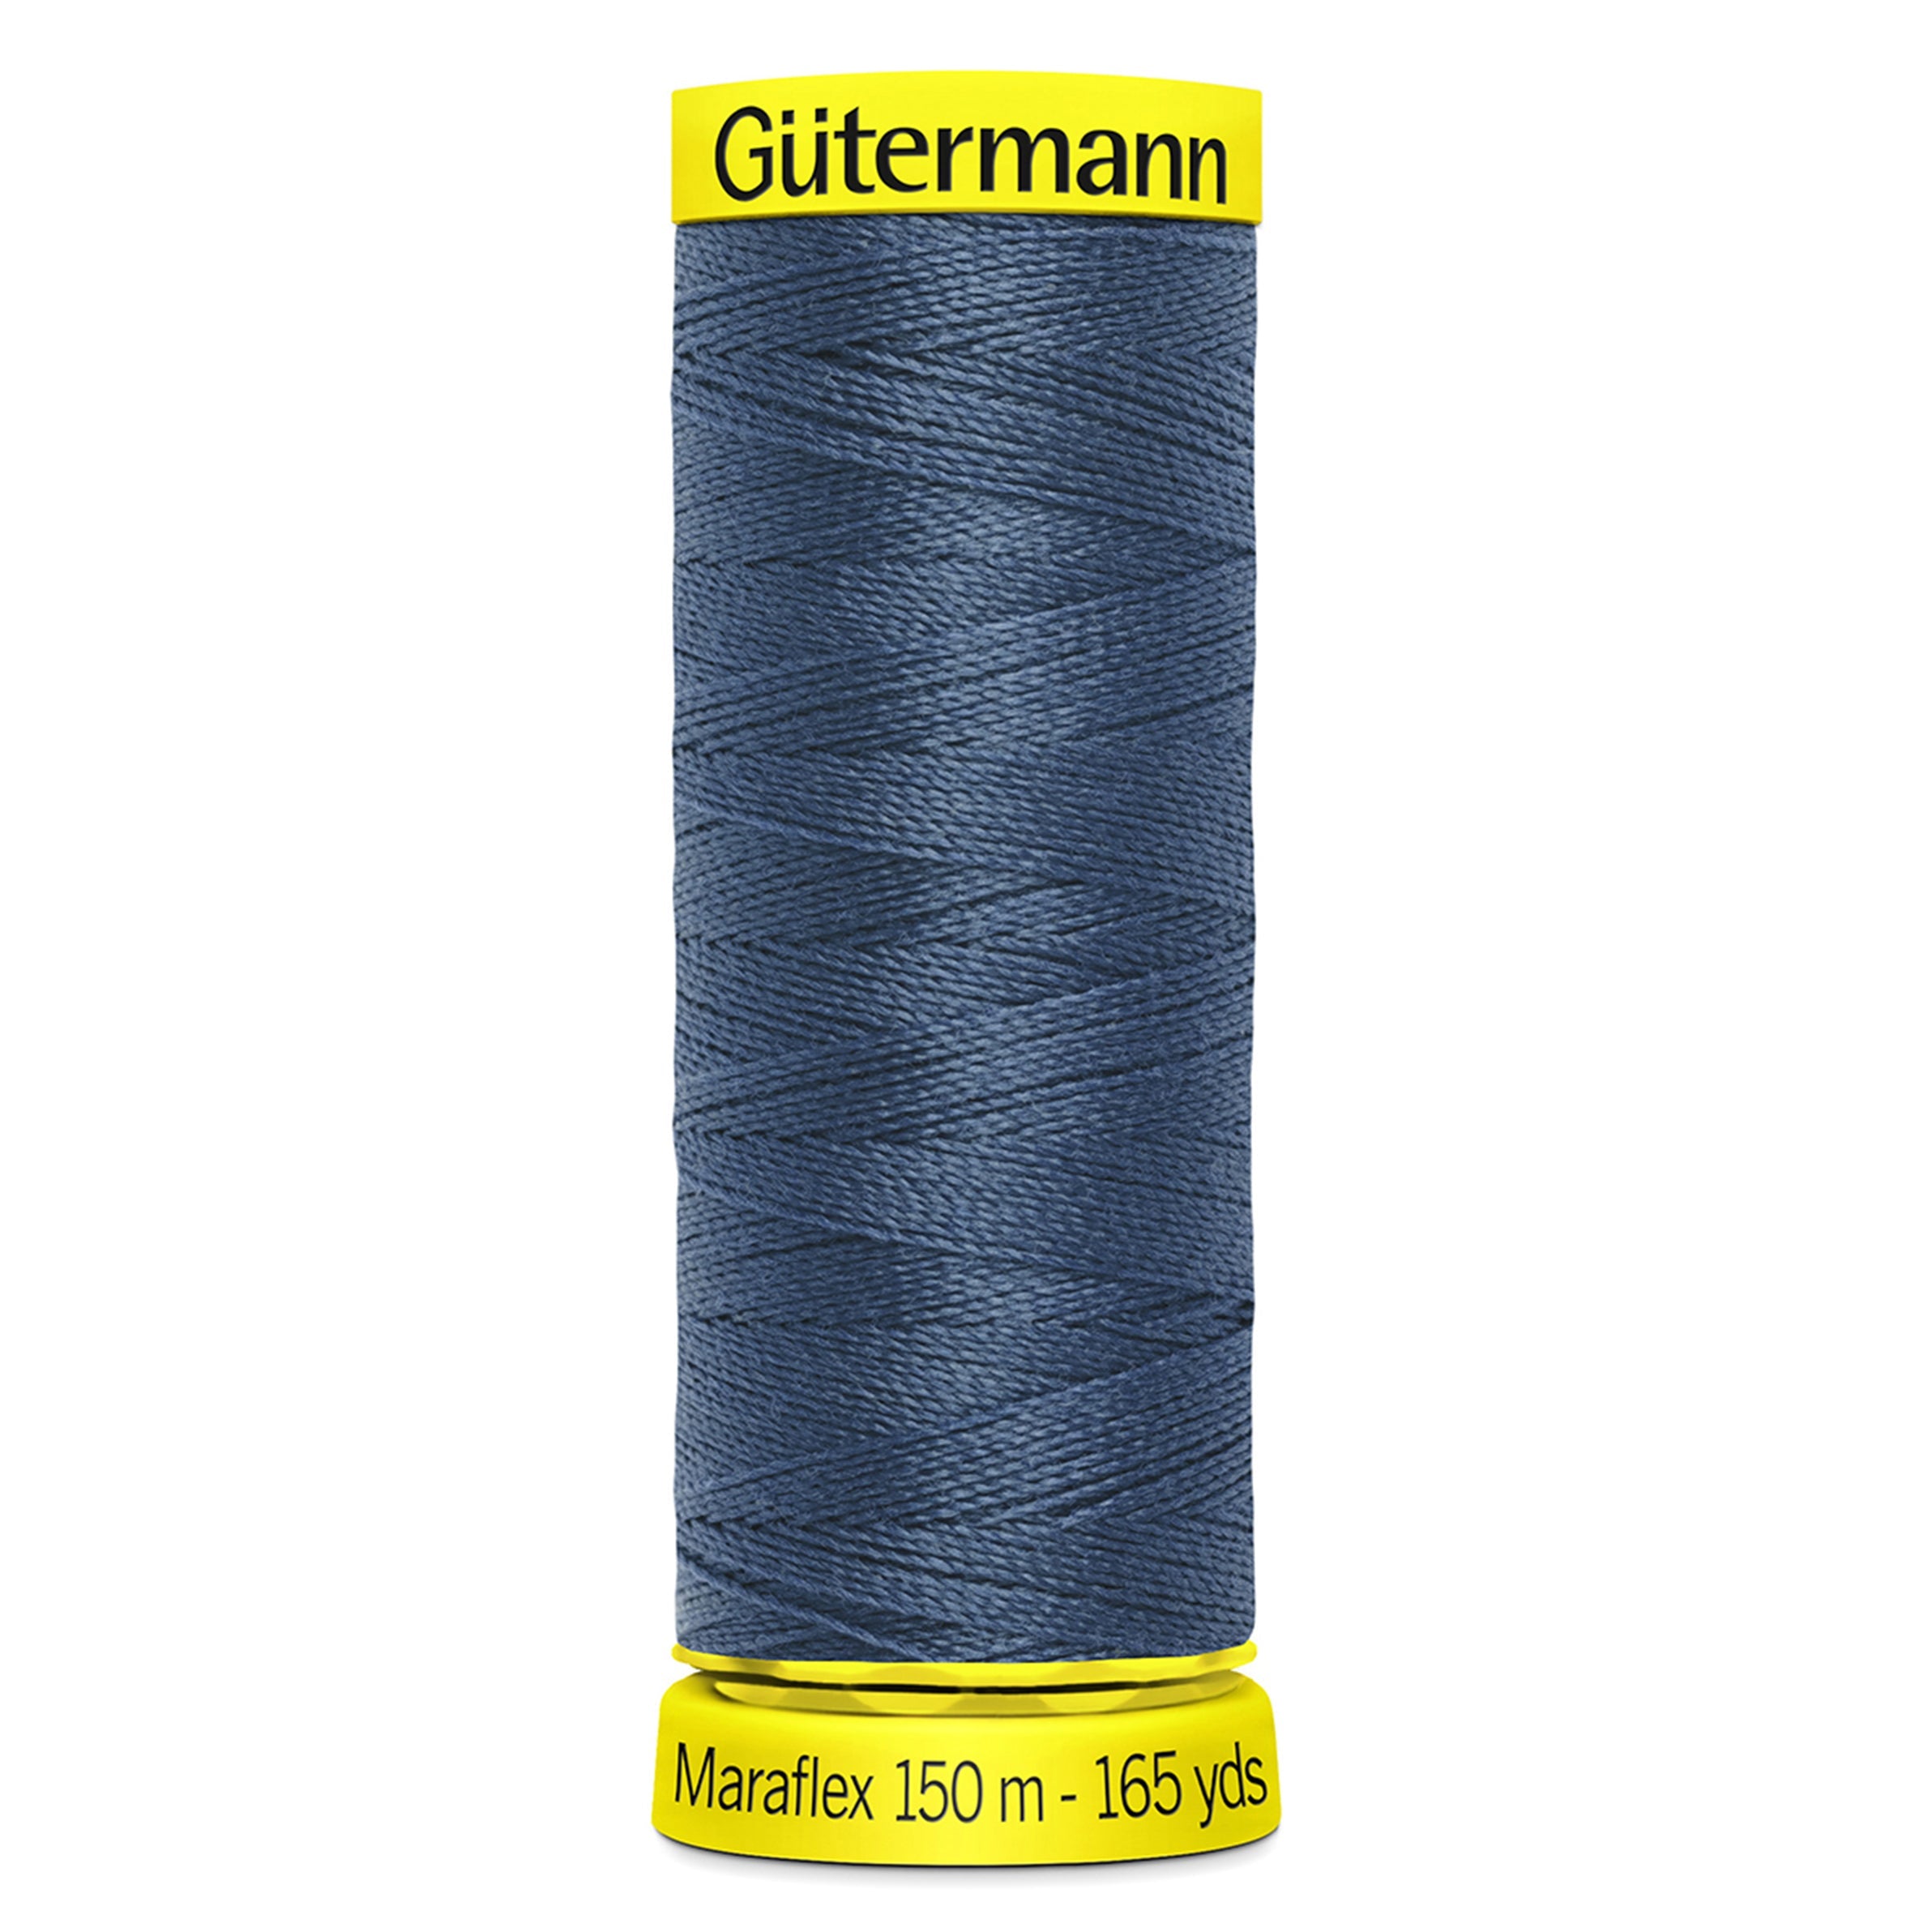 Gutermann Maraflex Stretchy Sewing Thread 150m colour 435 from Jaycotts Sewing Supplies